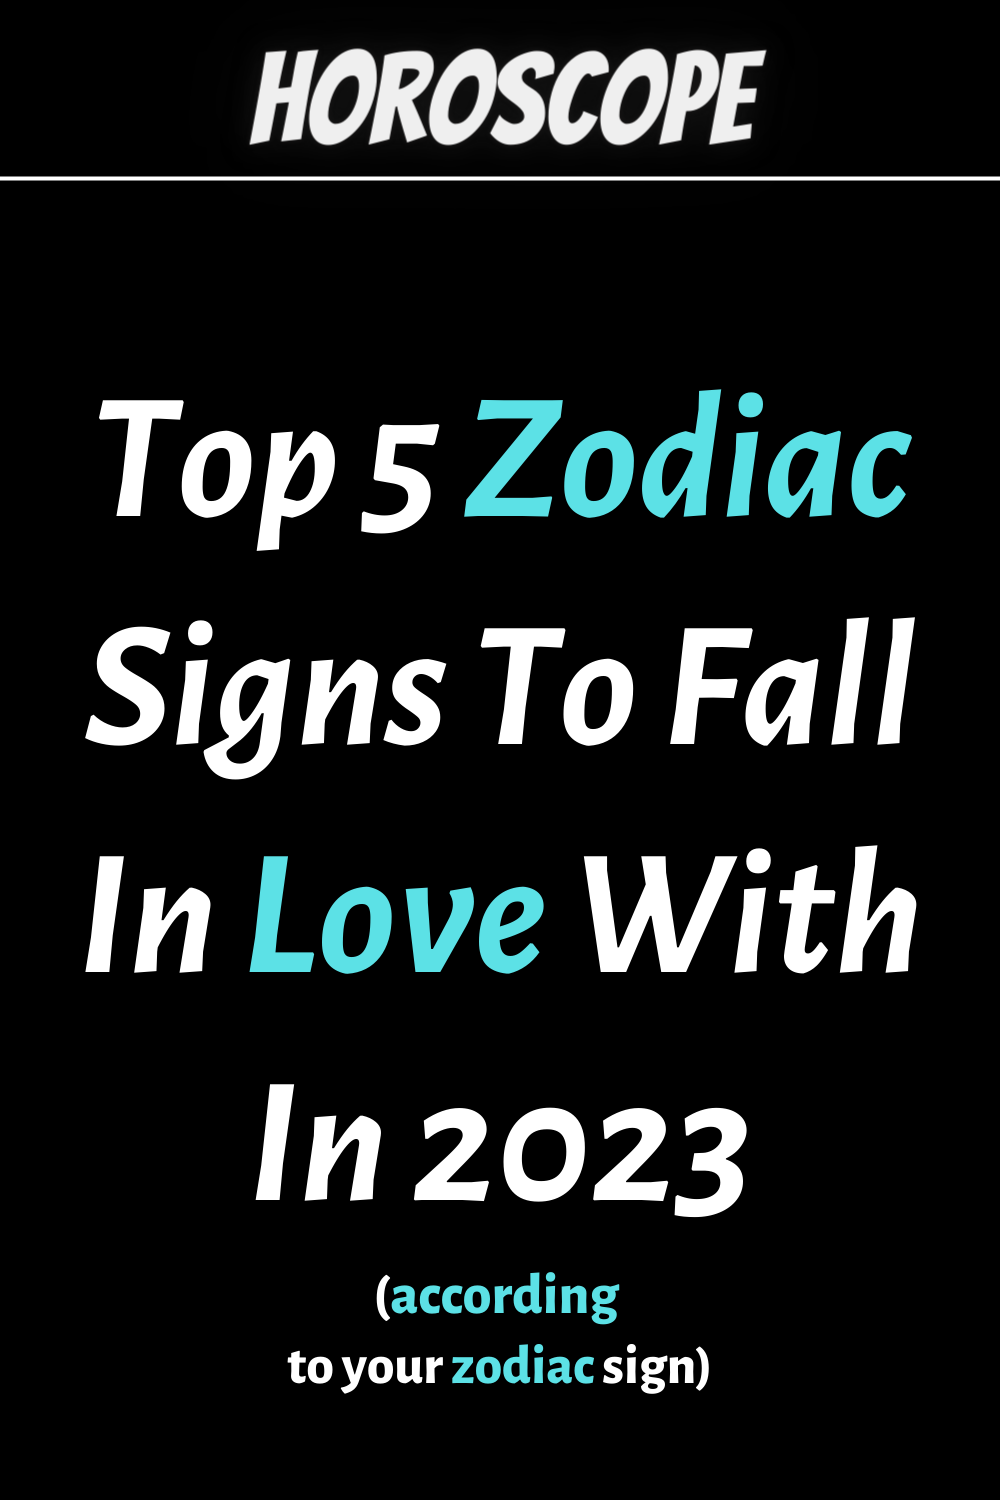 Top 5 Zodiac Signs To Fall In Love With In 2023